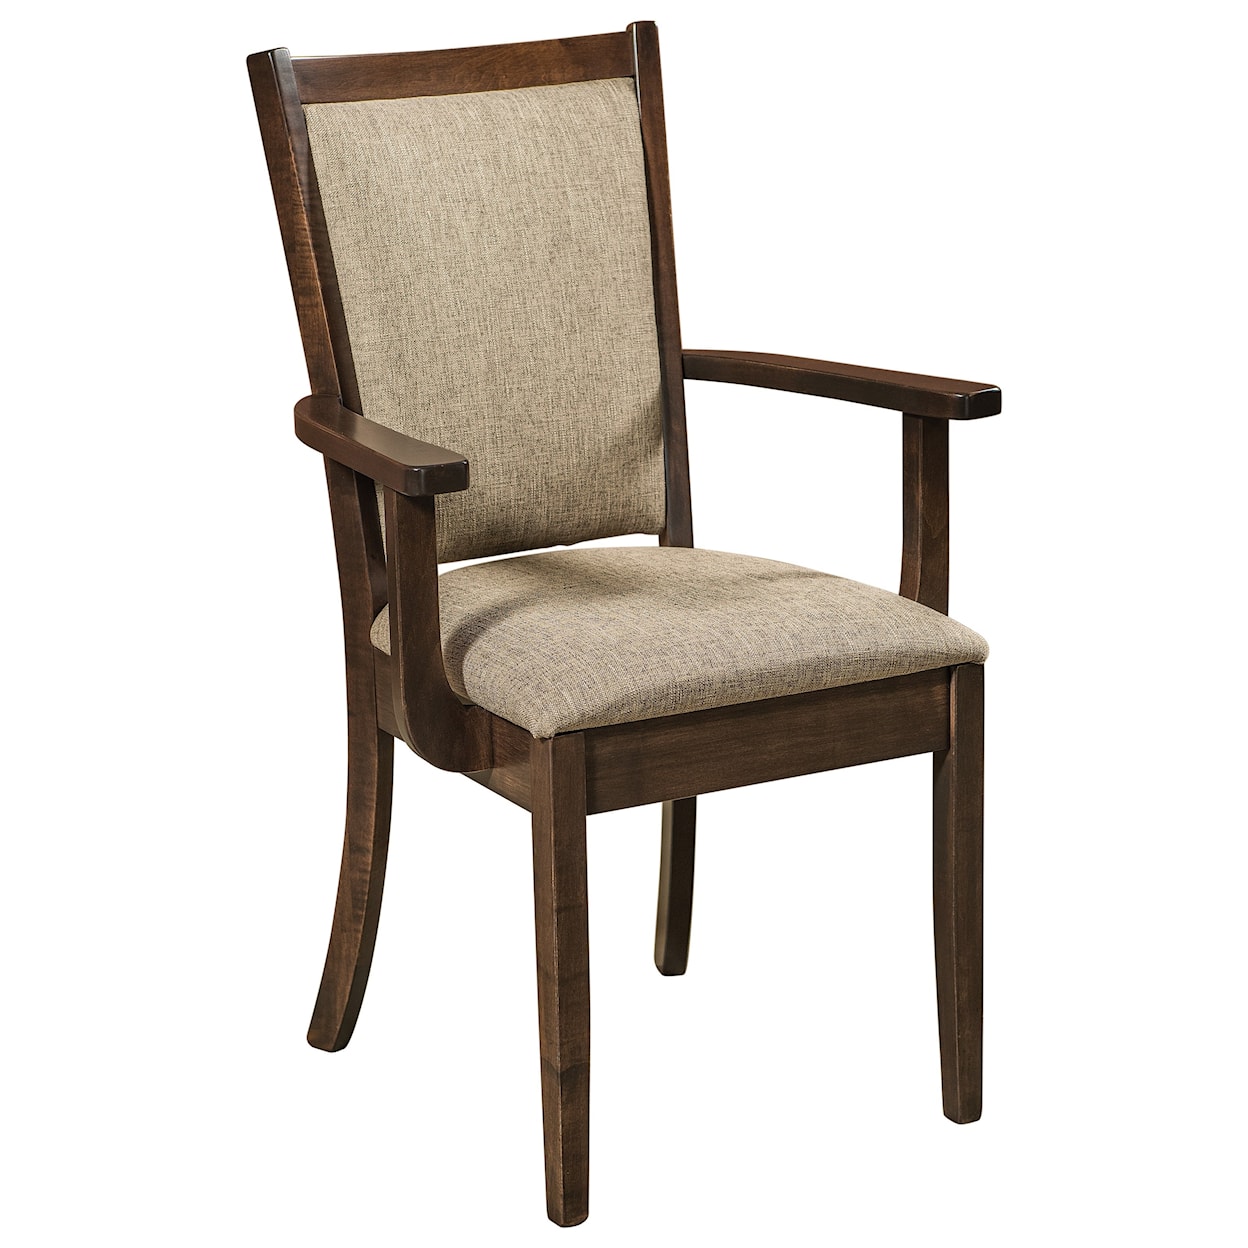 F&N Woodworking Kalispel Customizable Solid Wood Dining Arm Chair